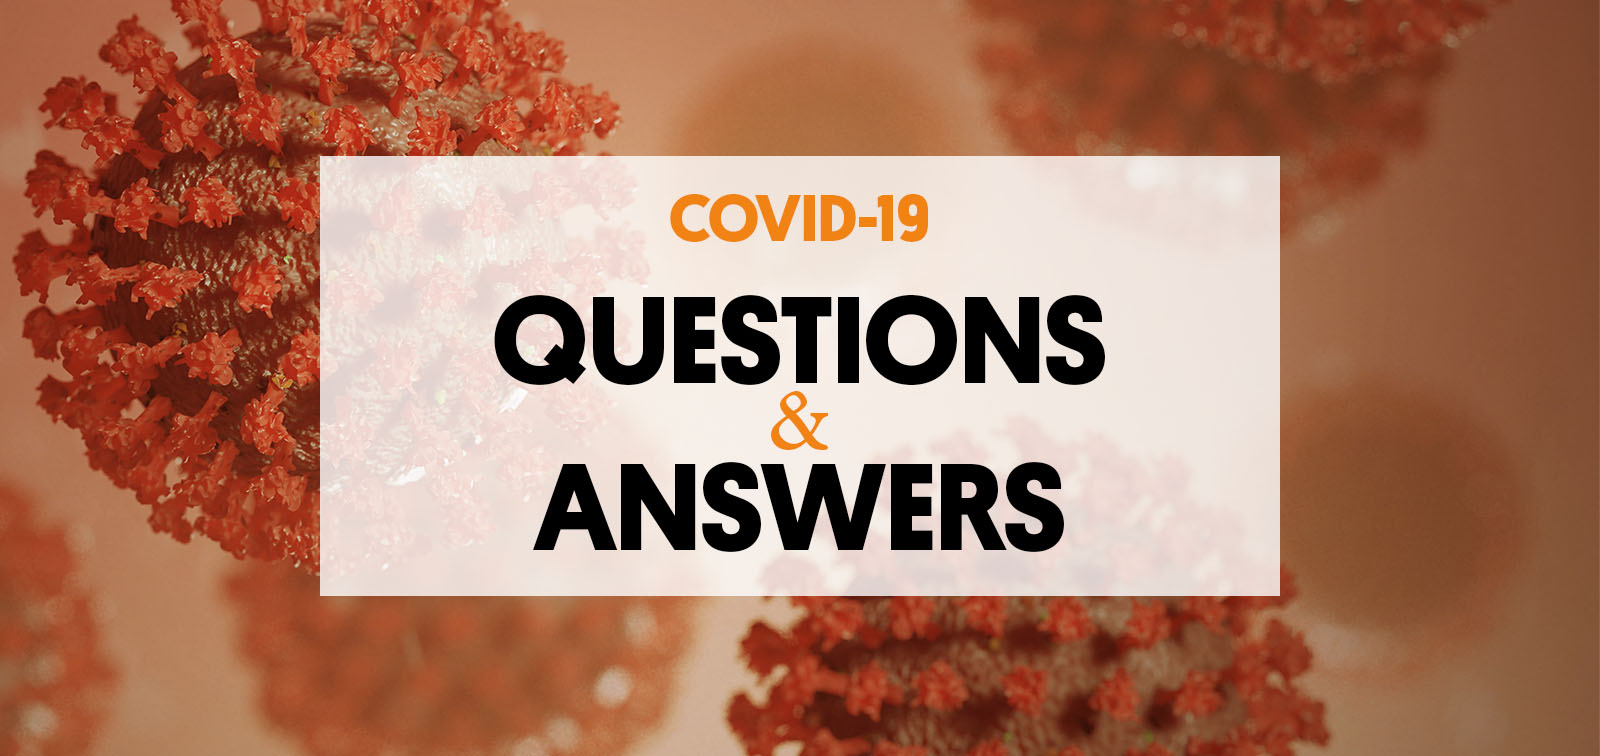 COVID-19: Questions & Answers